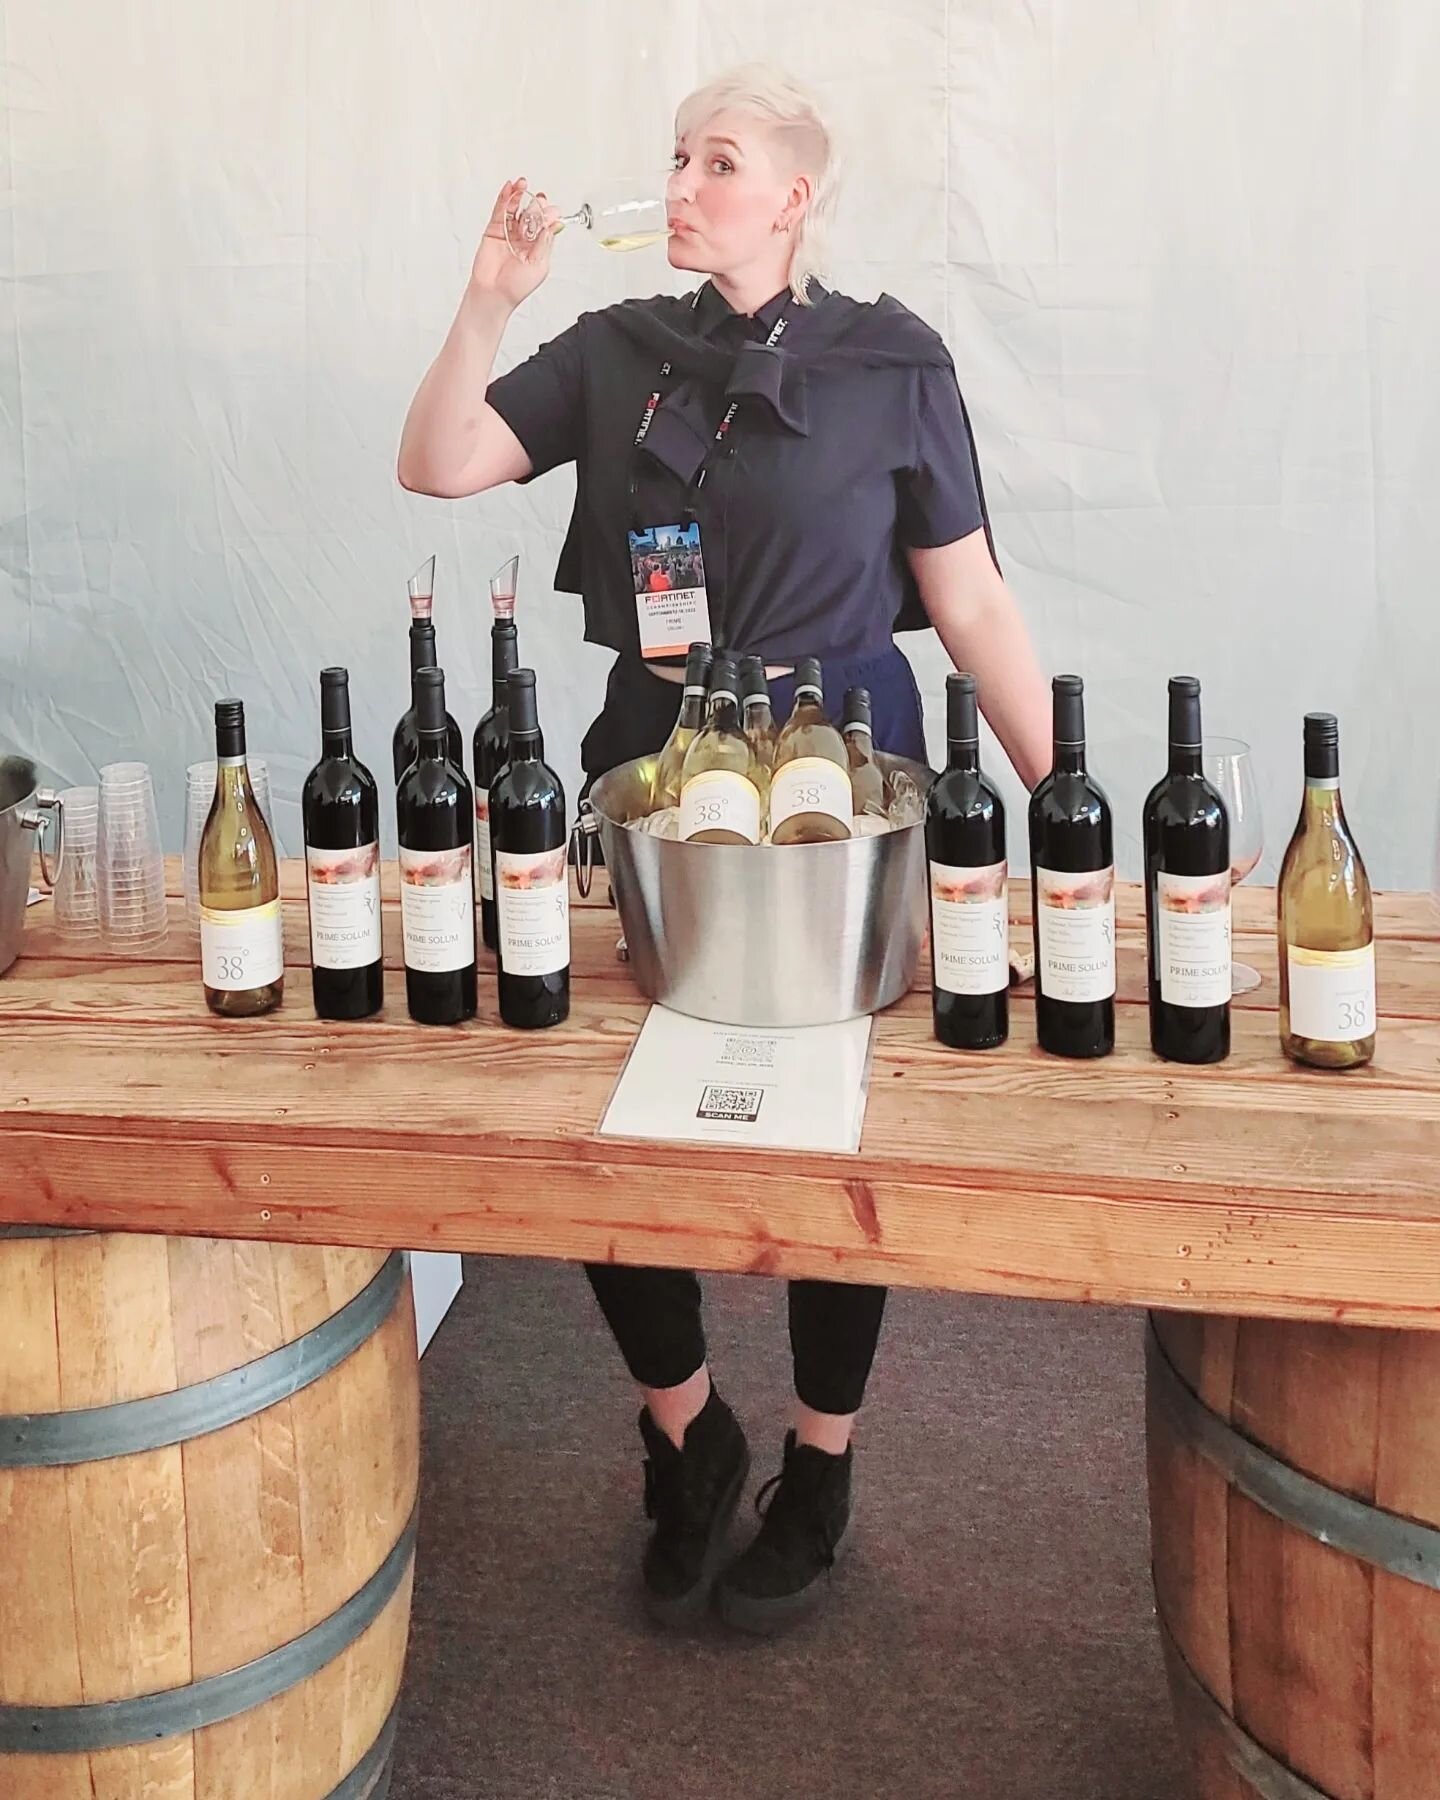 Thank you @fortinetchampionship for your amazing support of our local, family-owned business! We are so happy to have you in the neighborhood. 

#cheers #fortinet #silveradoresort #wine #winetasting #localbusiness #Napa